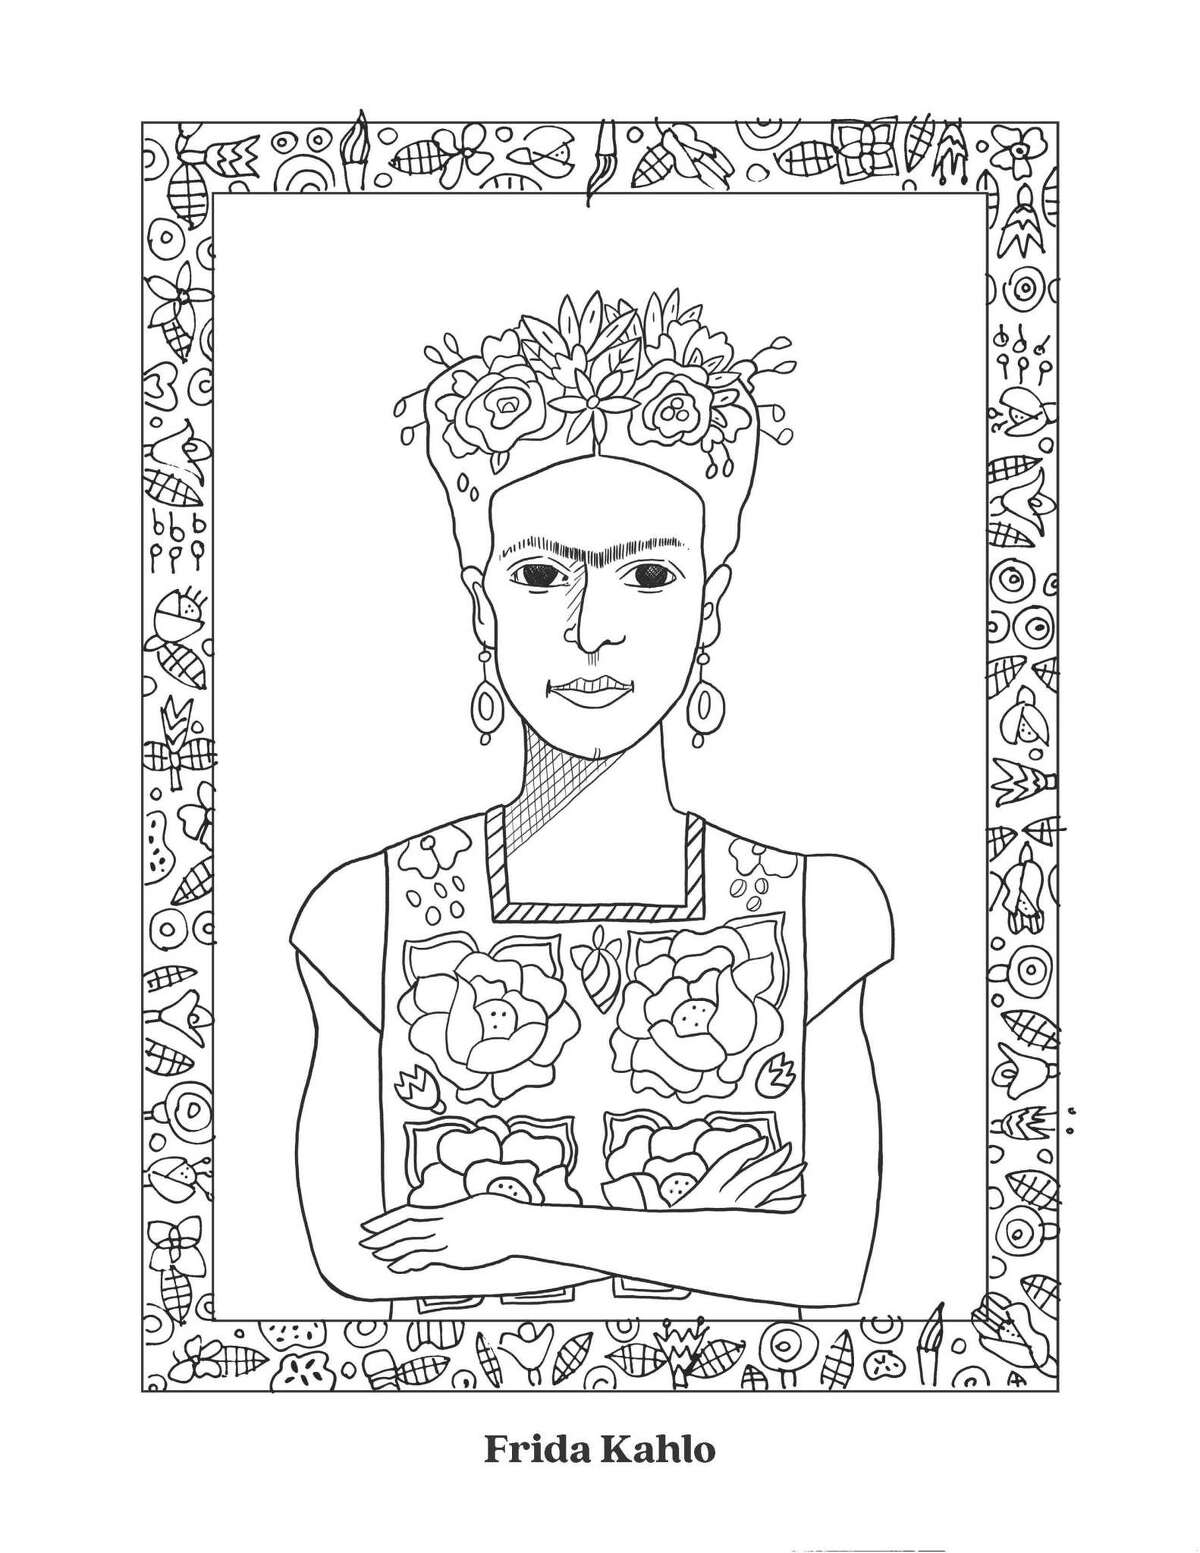 Mexican artist Frida Kahlo is one of the people featured in the new "Revolutionary Women of Texas and Mexico" coloring book.